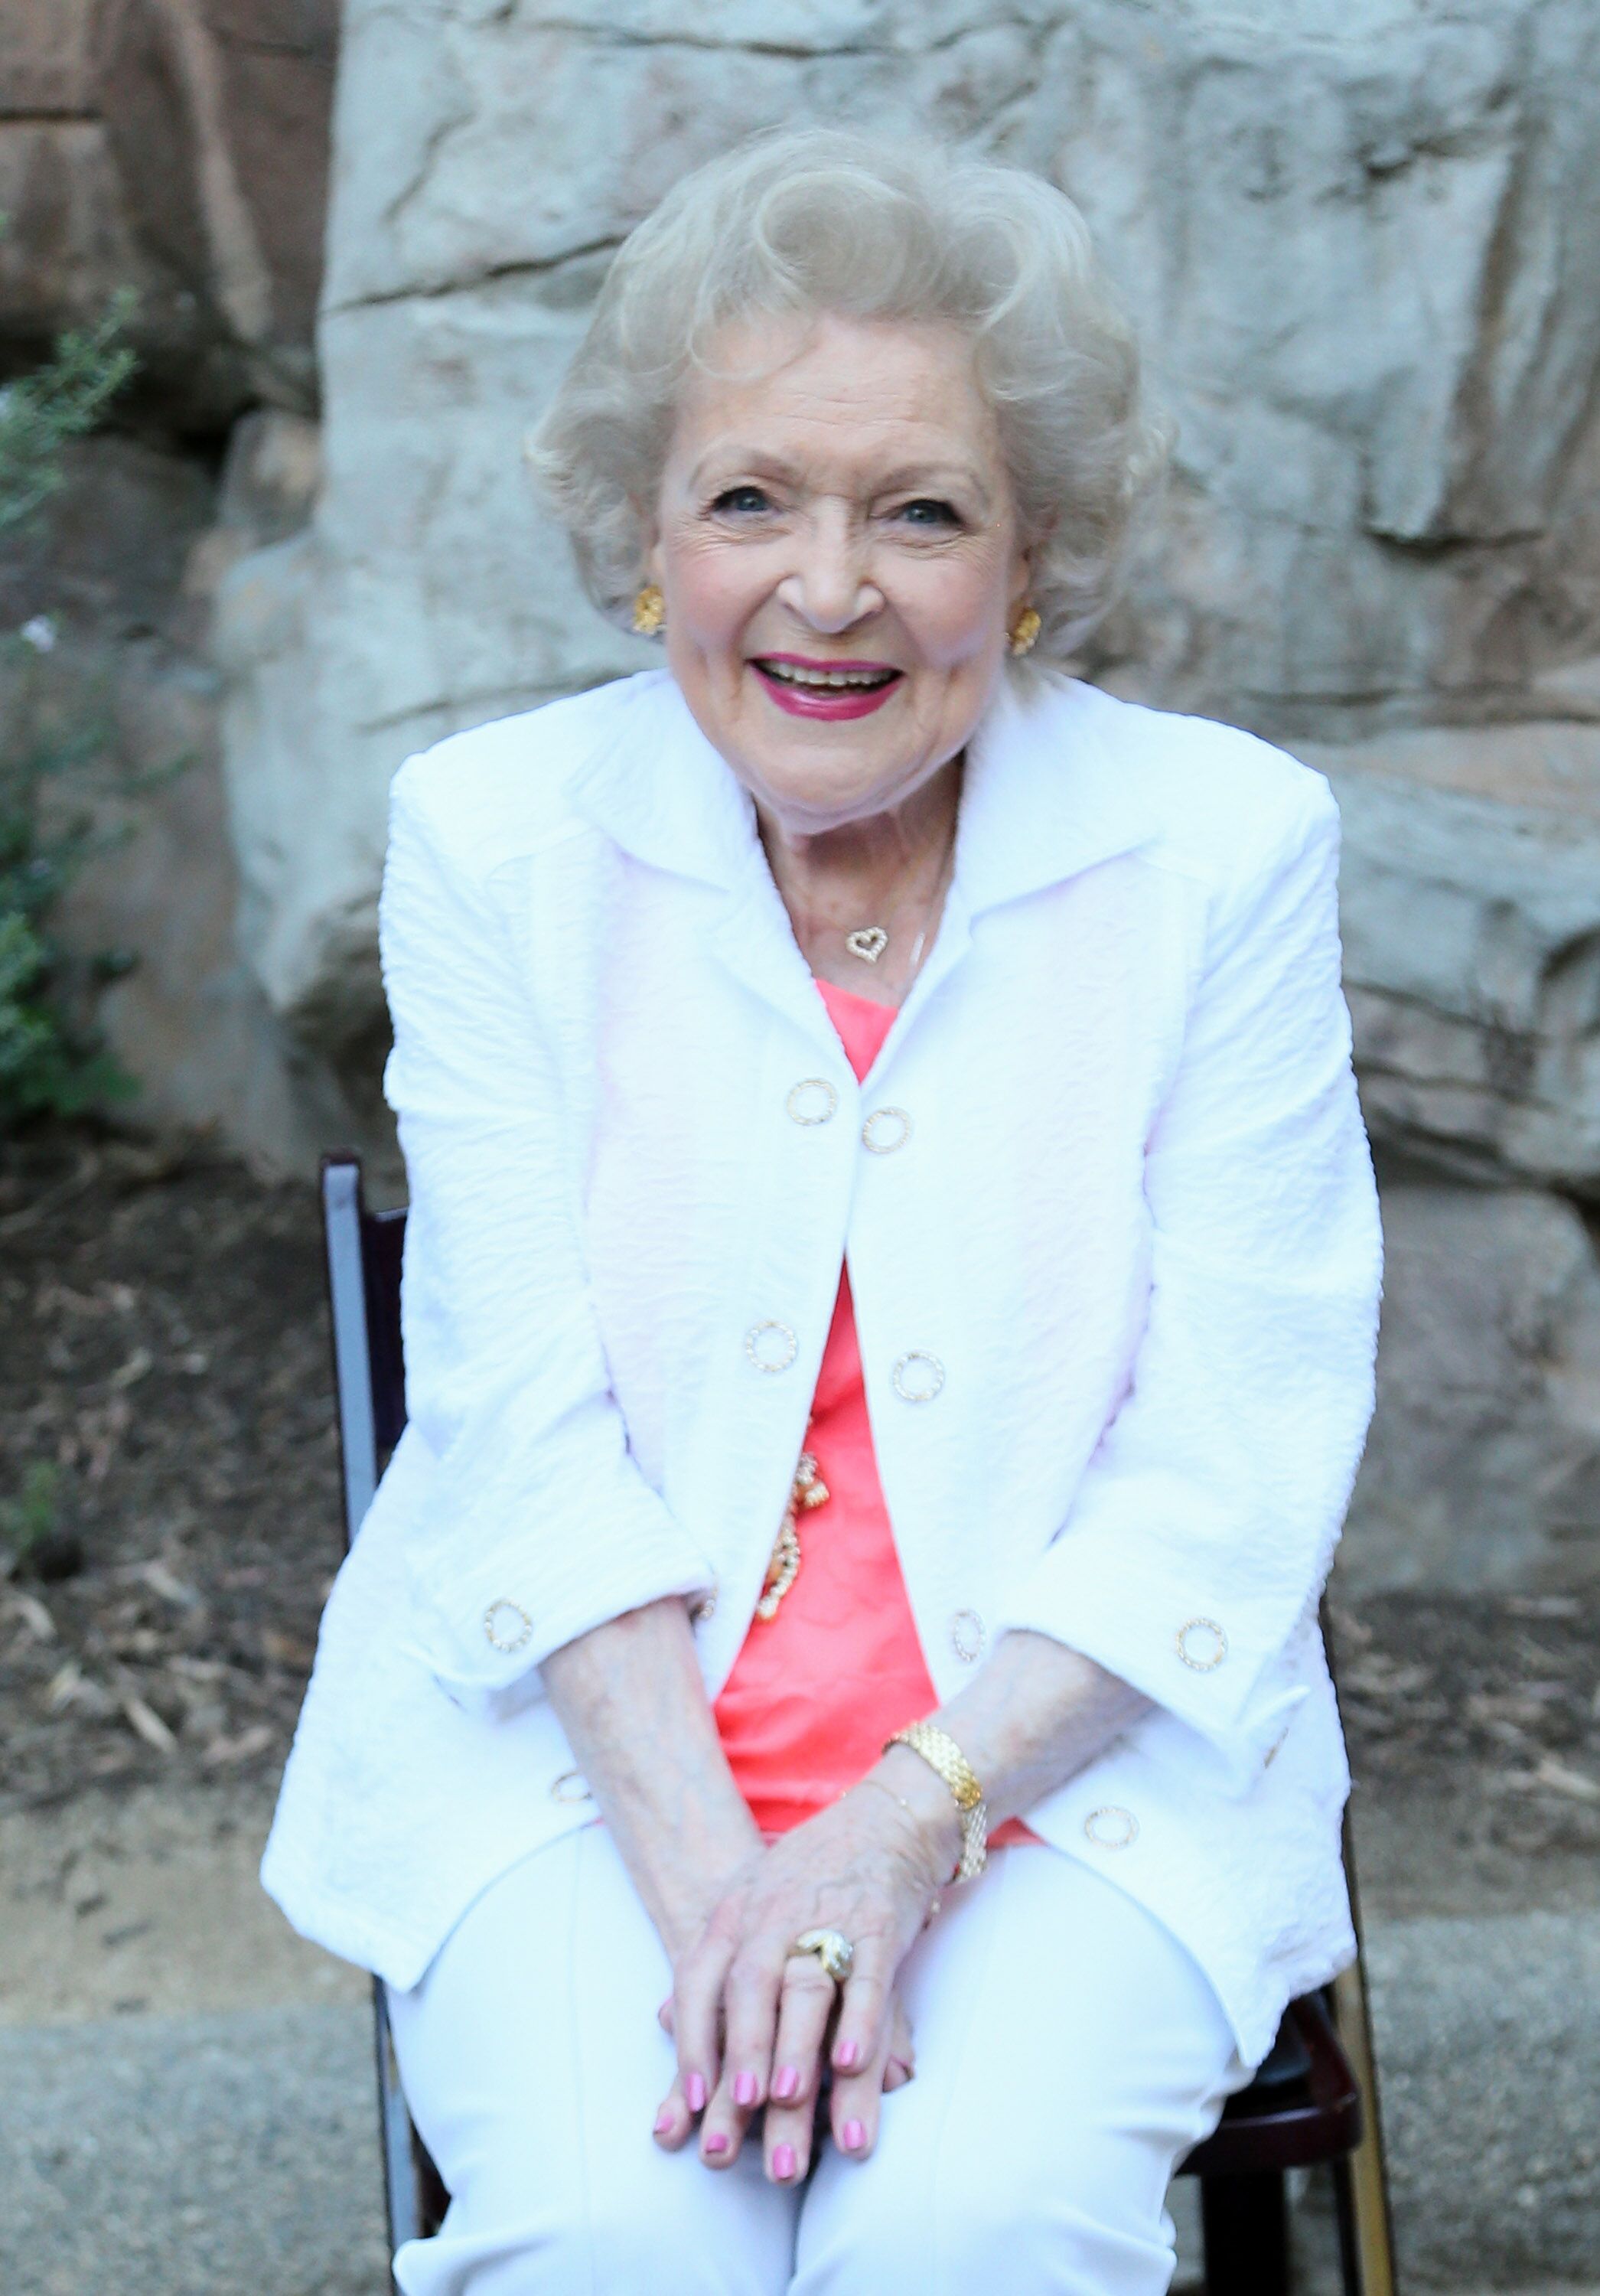  L'actrice Betty White à Los Angeles, Californie. | Photo : GettyImage